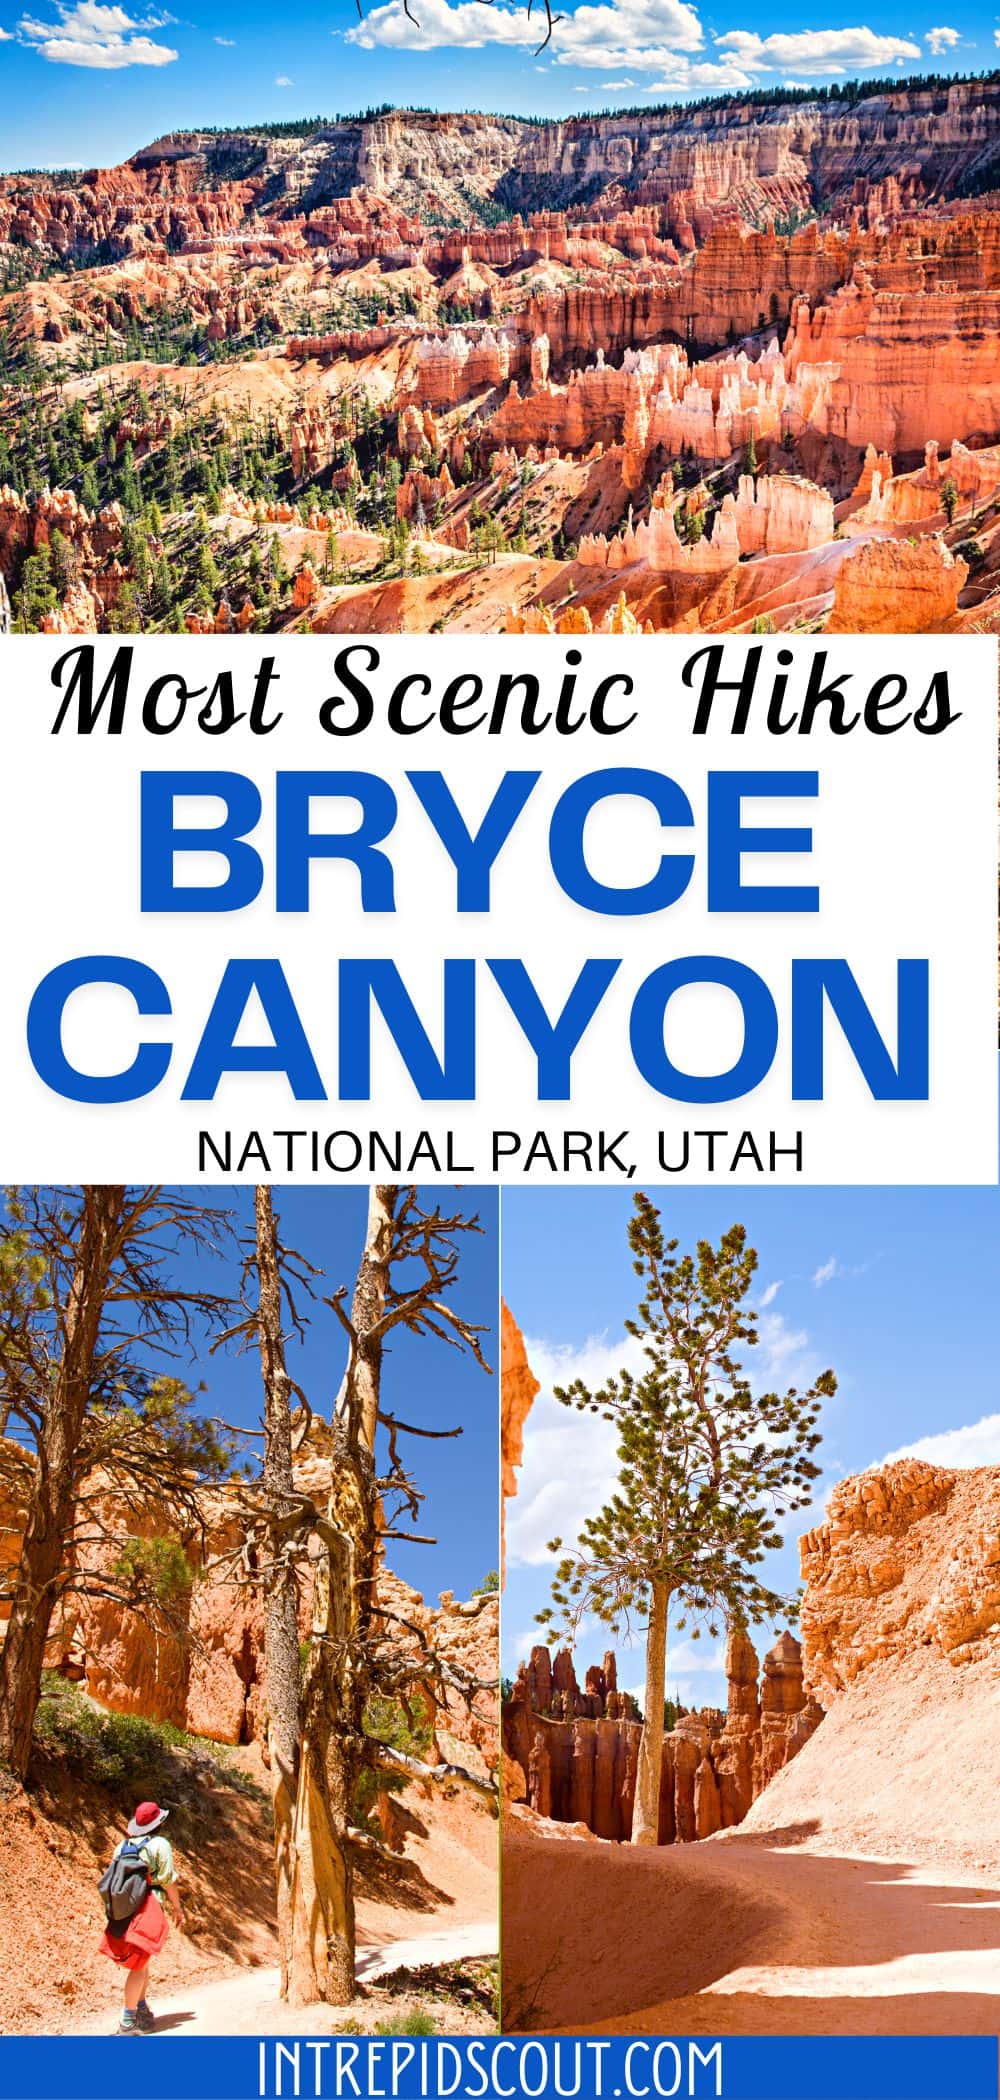 Most Scenic Hikes in Bryce Canyon